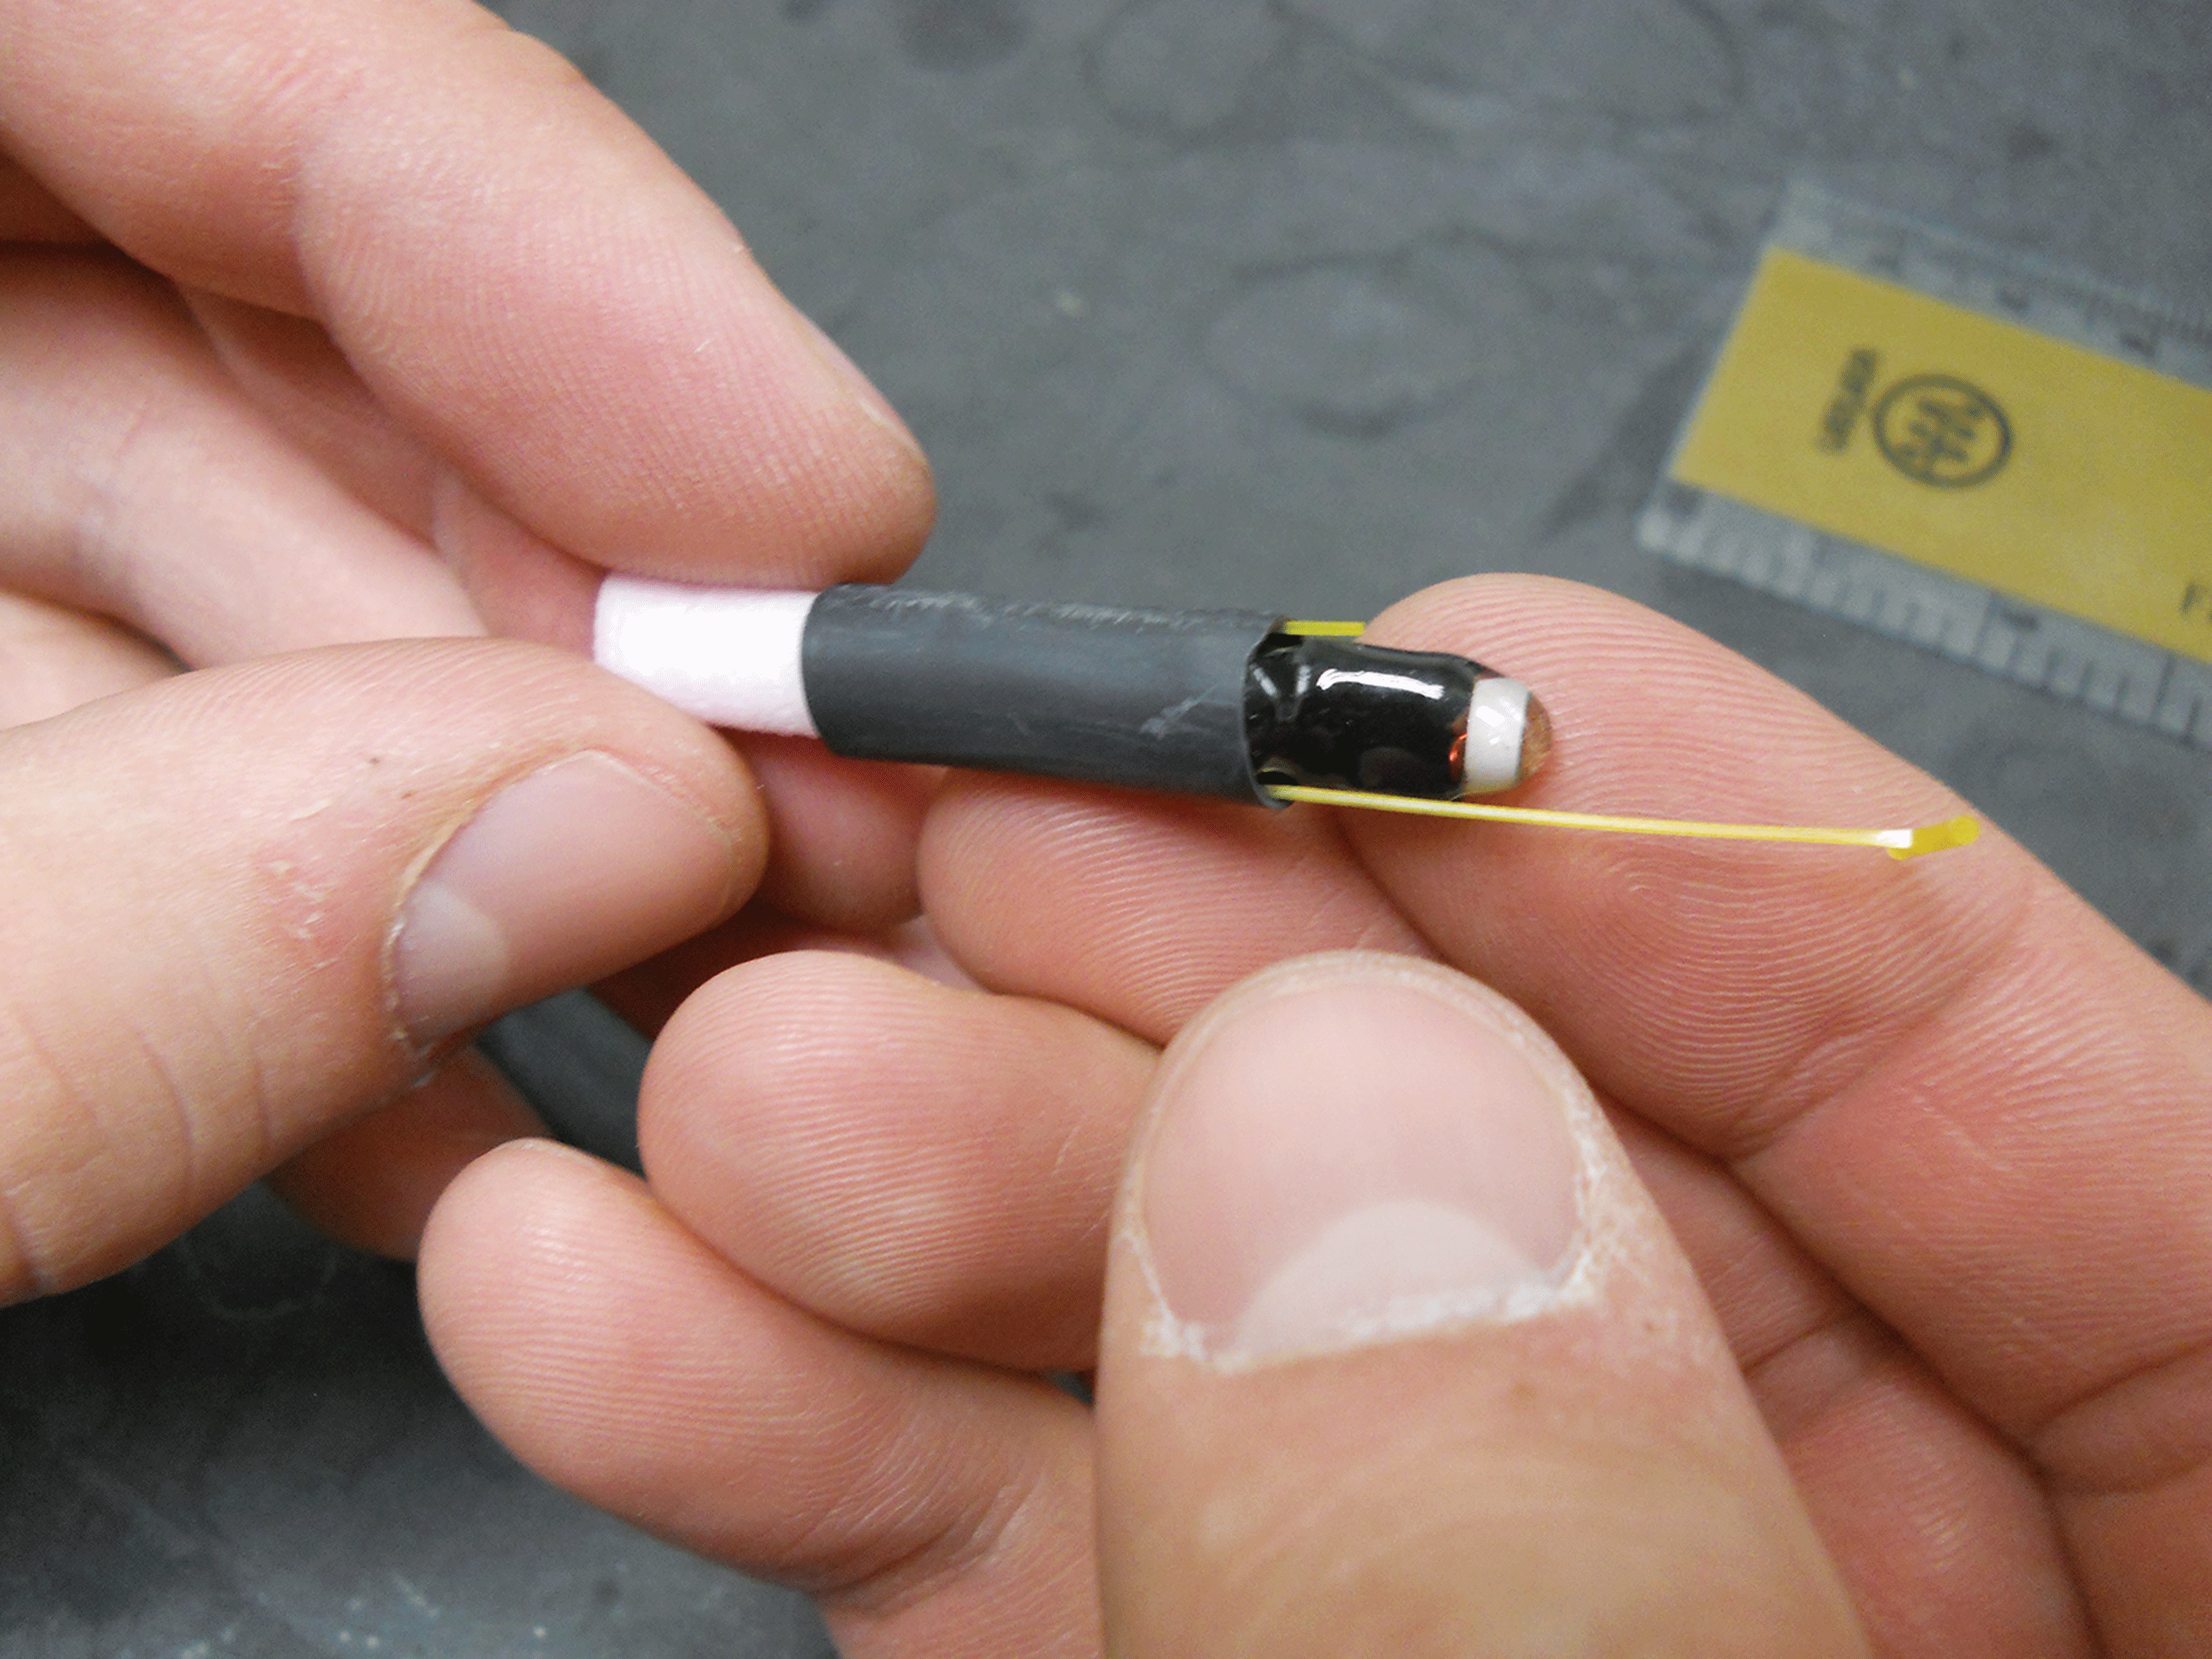 Photograph showing transmitter pushed into shrink tubing.